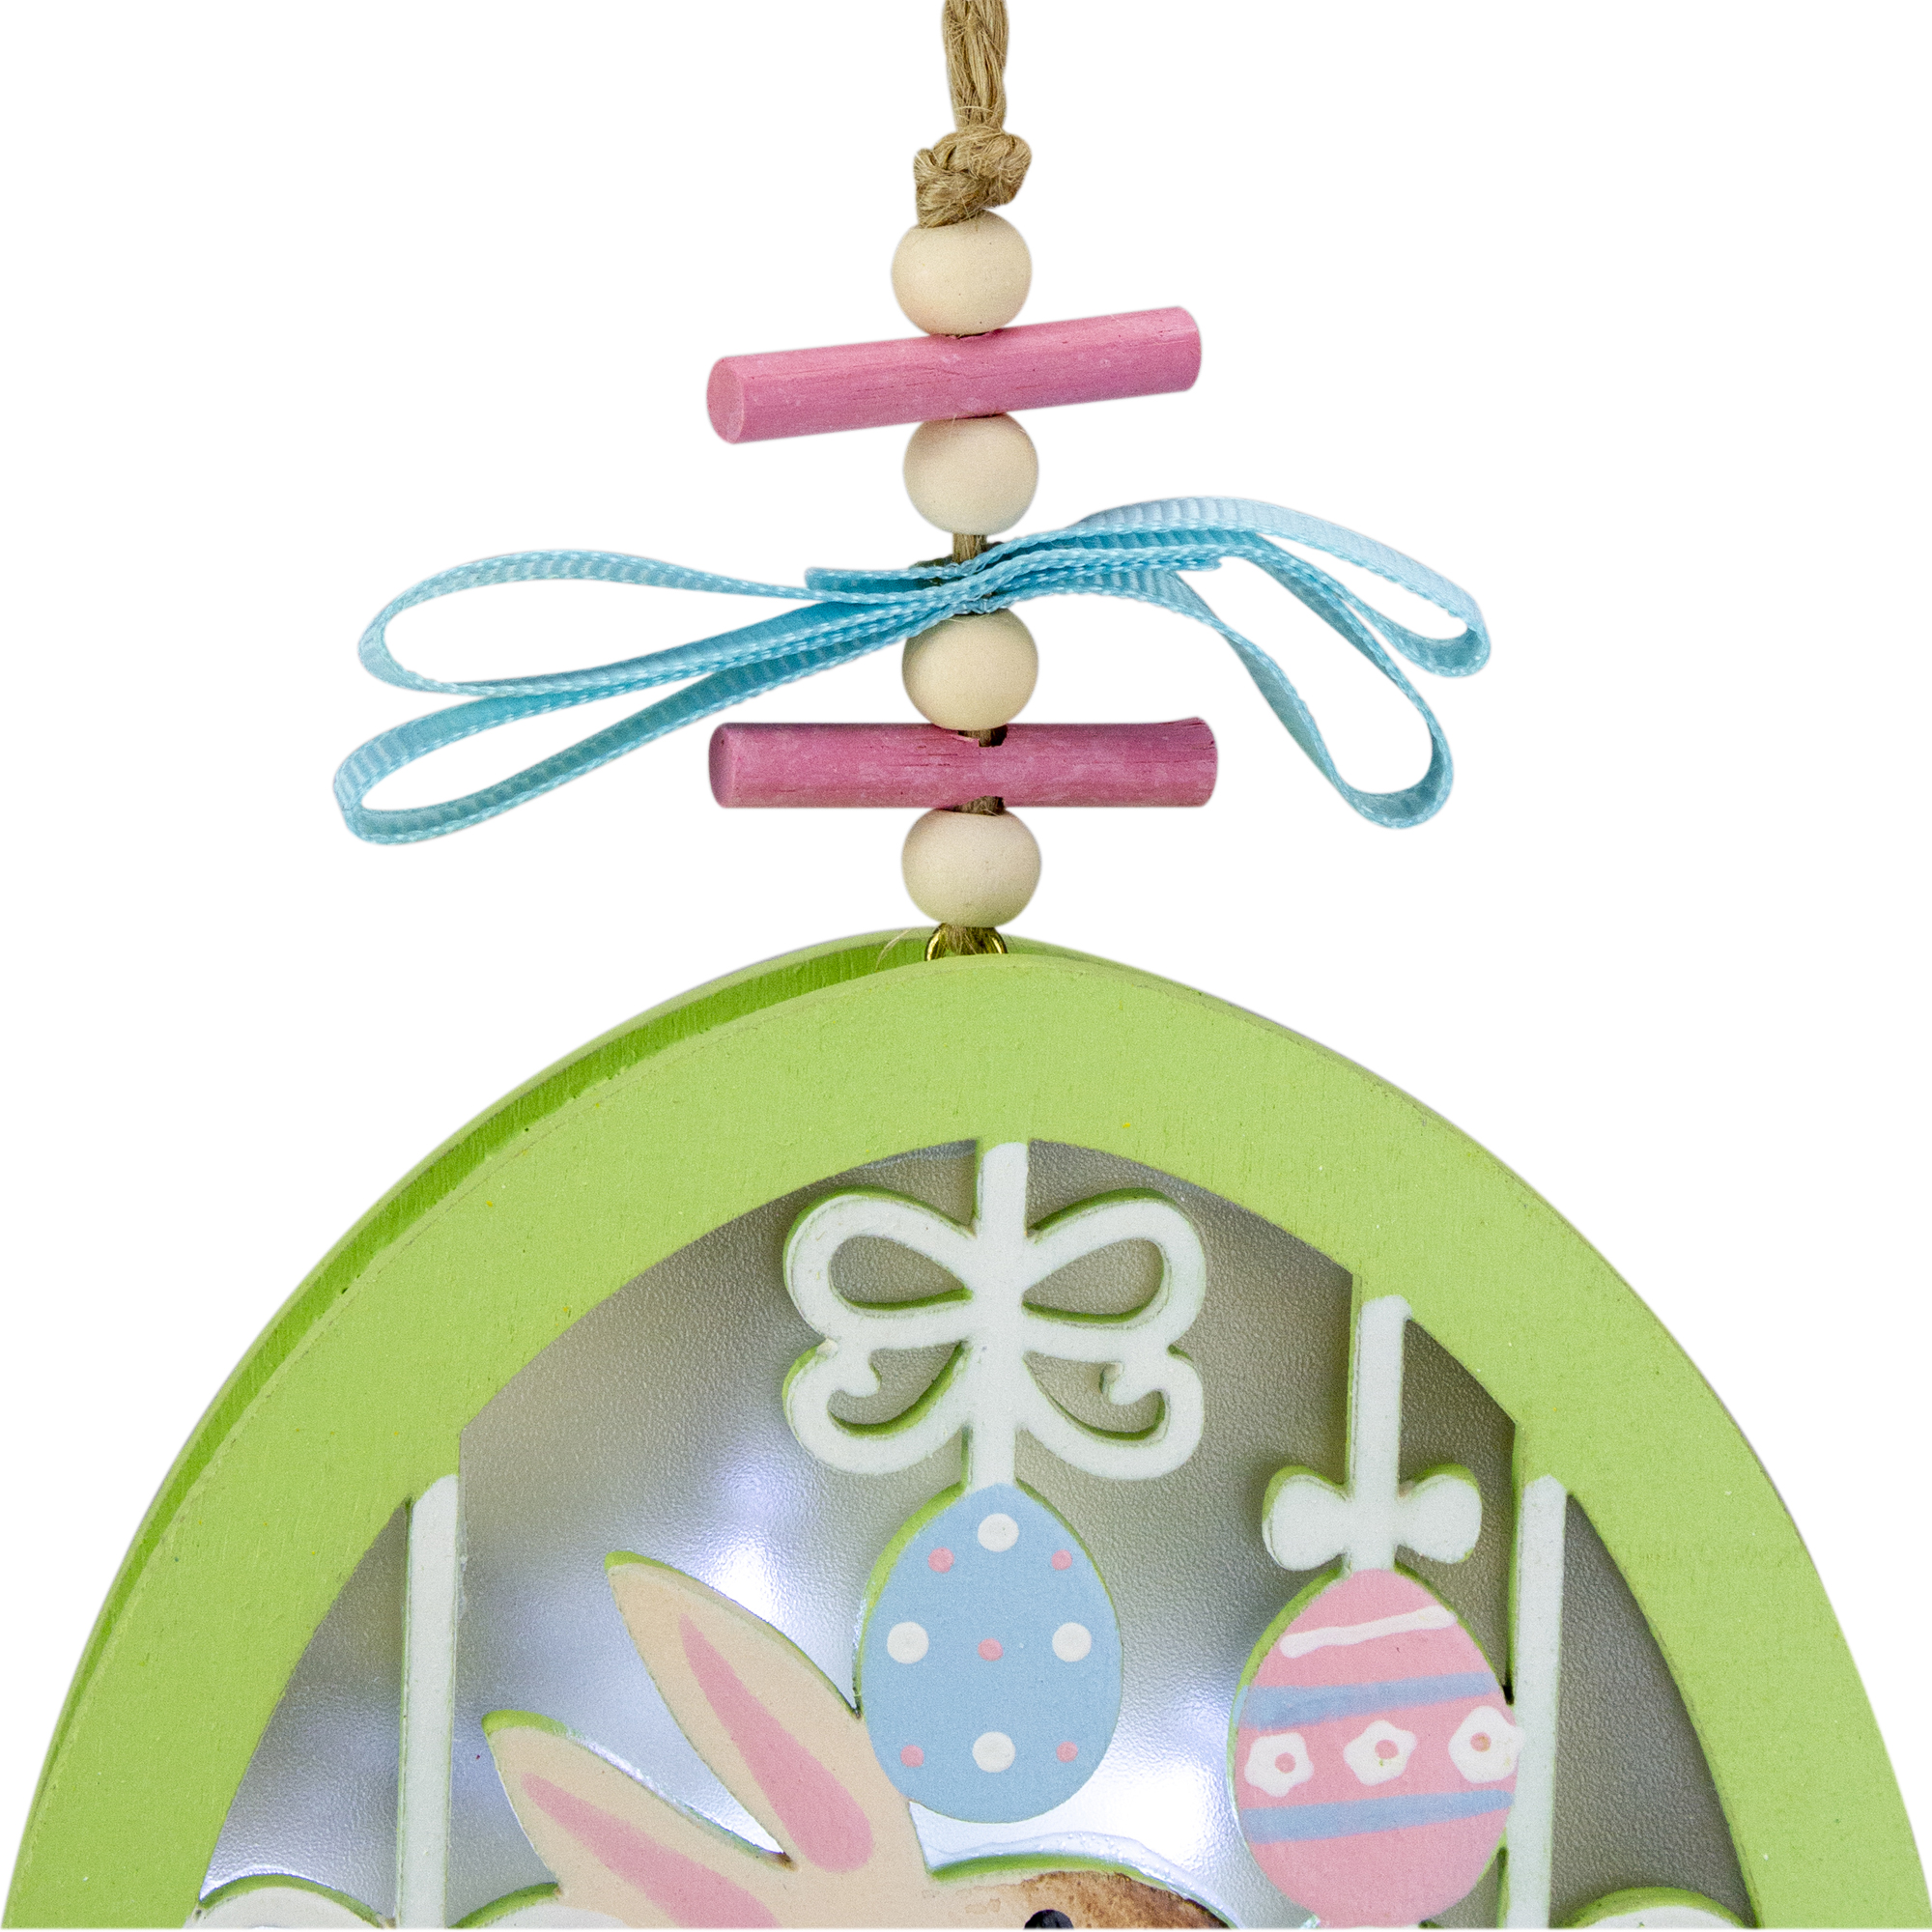 Gallerie II 5.9" Wooden  Easter Eggs and Bunny LED Shadow Box Ornament Battery Operated - image 3 of 3